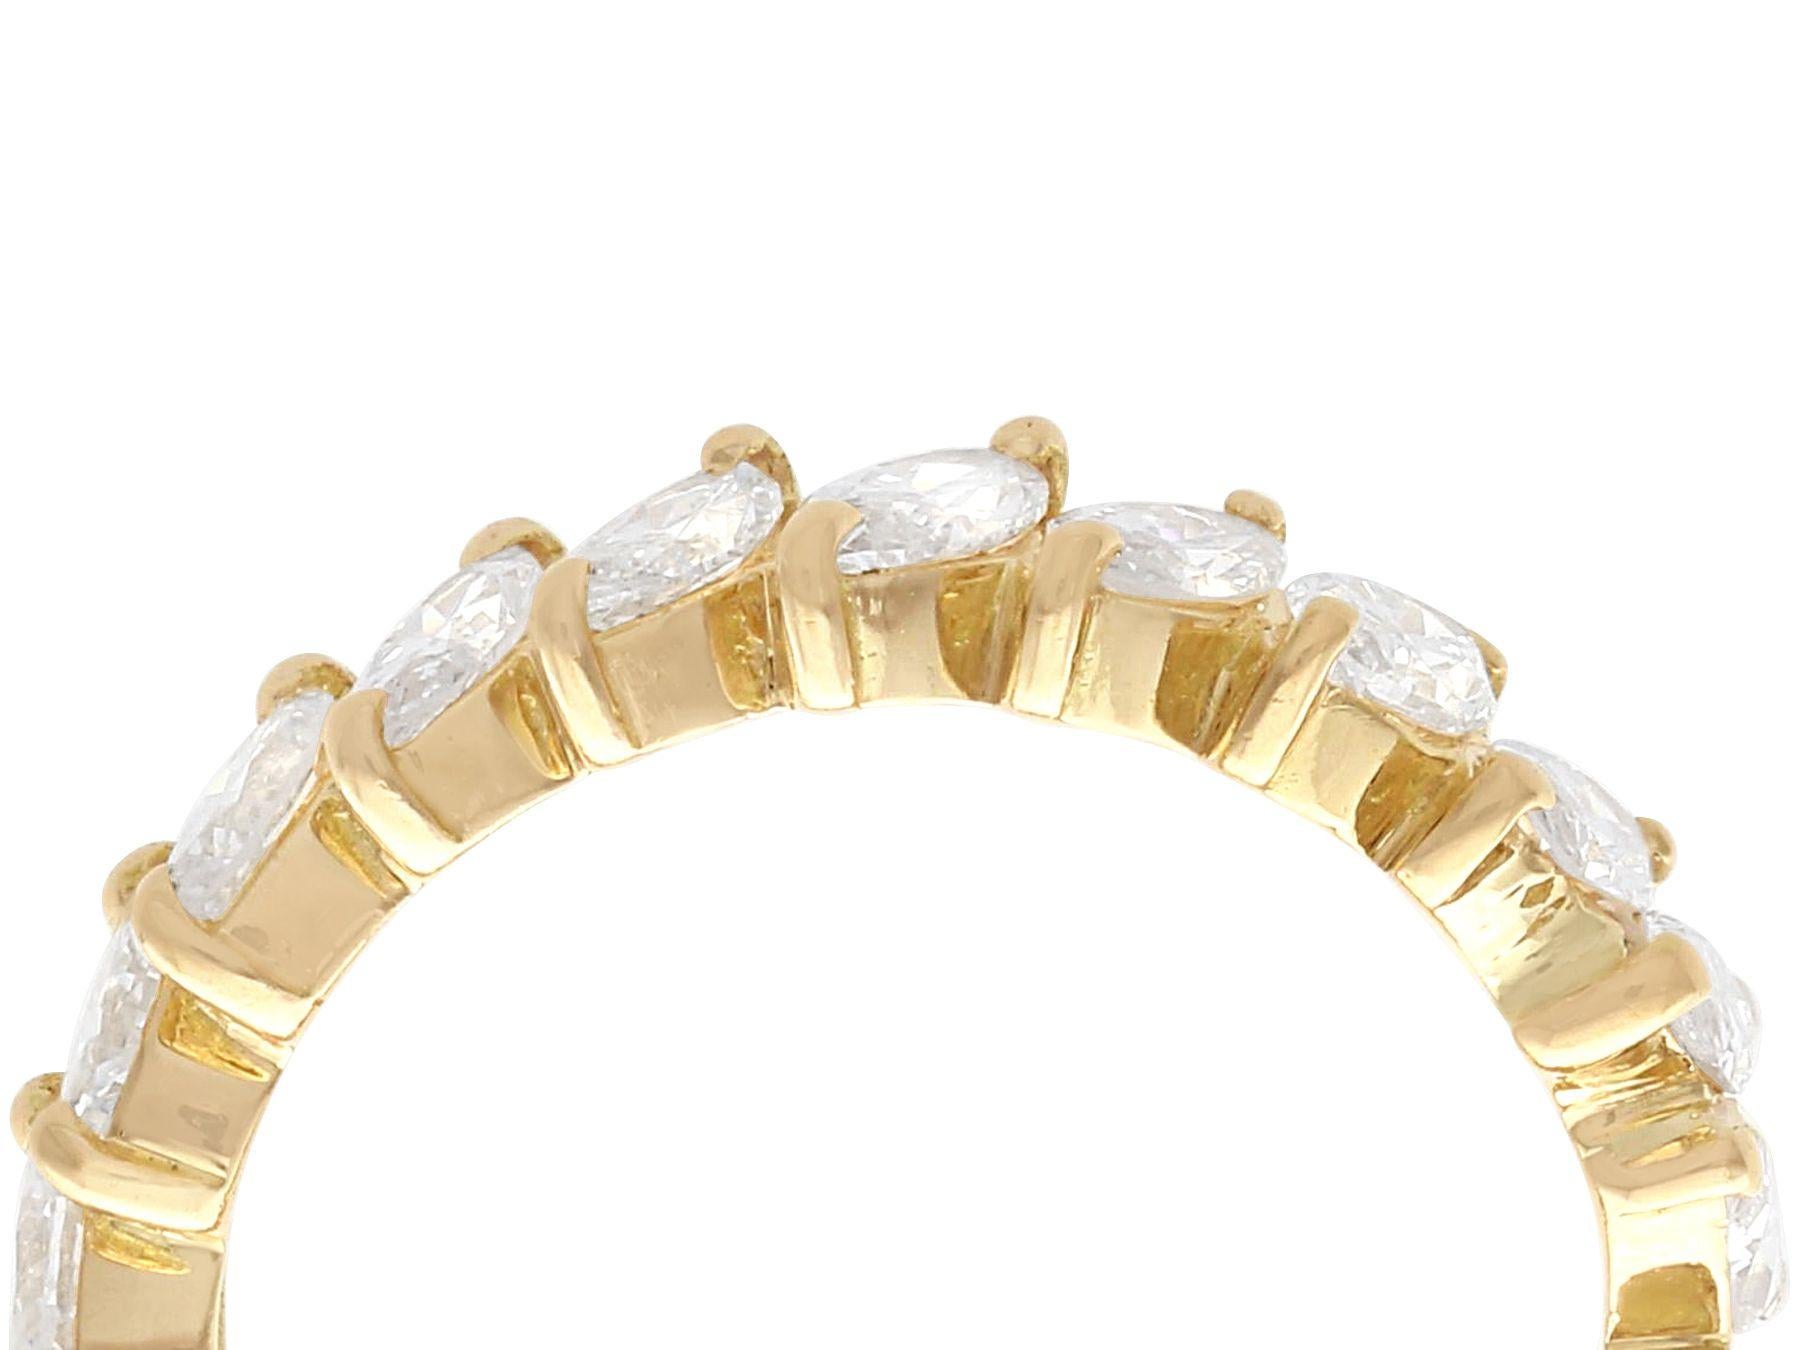 A stunning, fine and impressive vintage French 2.23 carat diamond and 18 karat yellow gold full eternity ring; part of our diverse diamond jewelry and estate jewelry collections.

This stunning vintage diamond eternity ring has been crafted in 18k